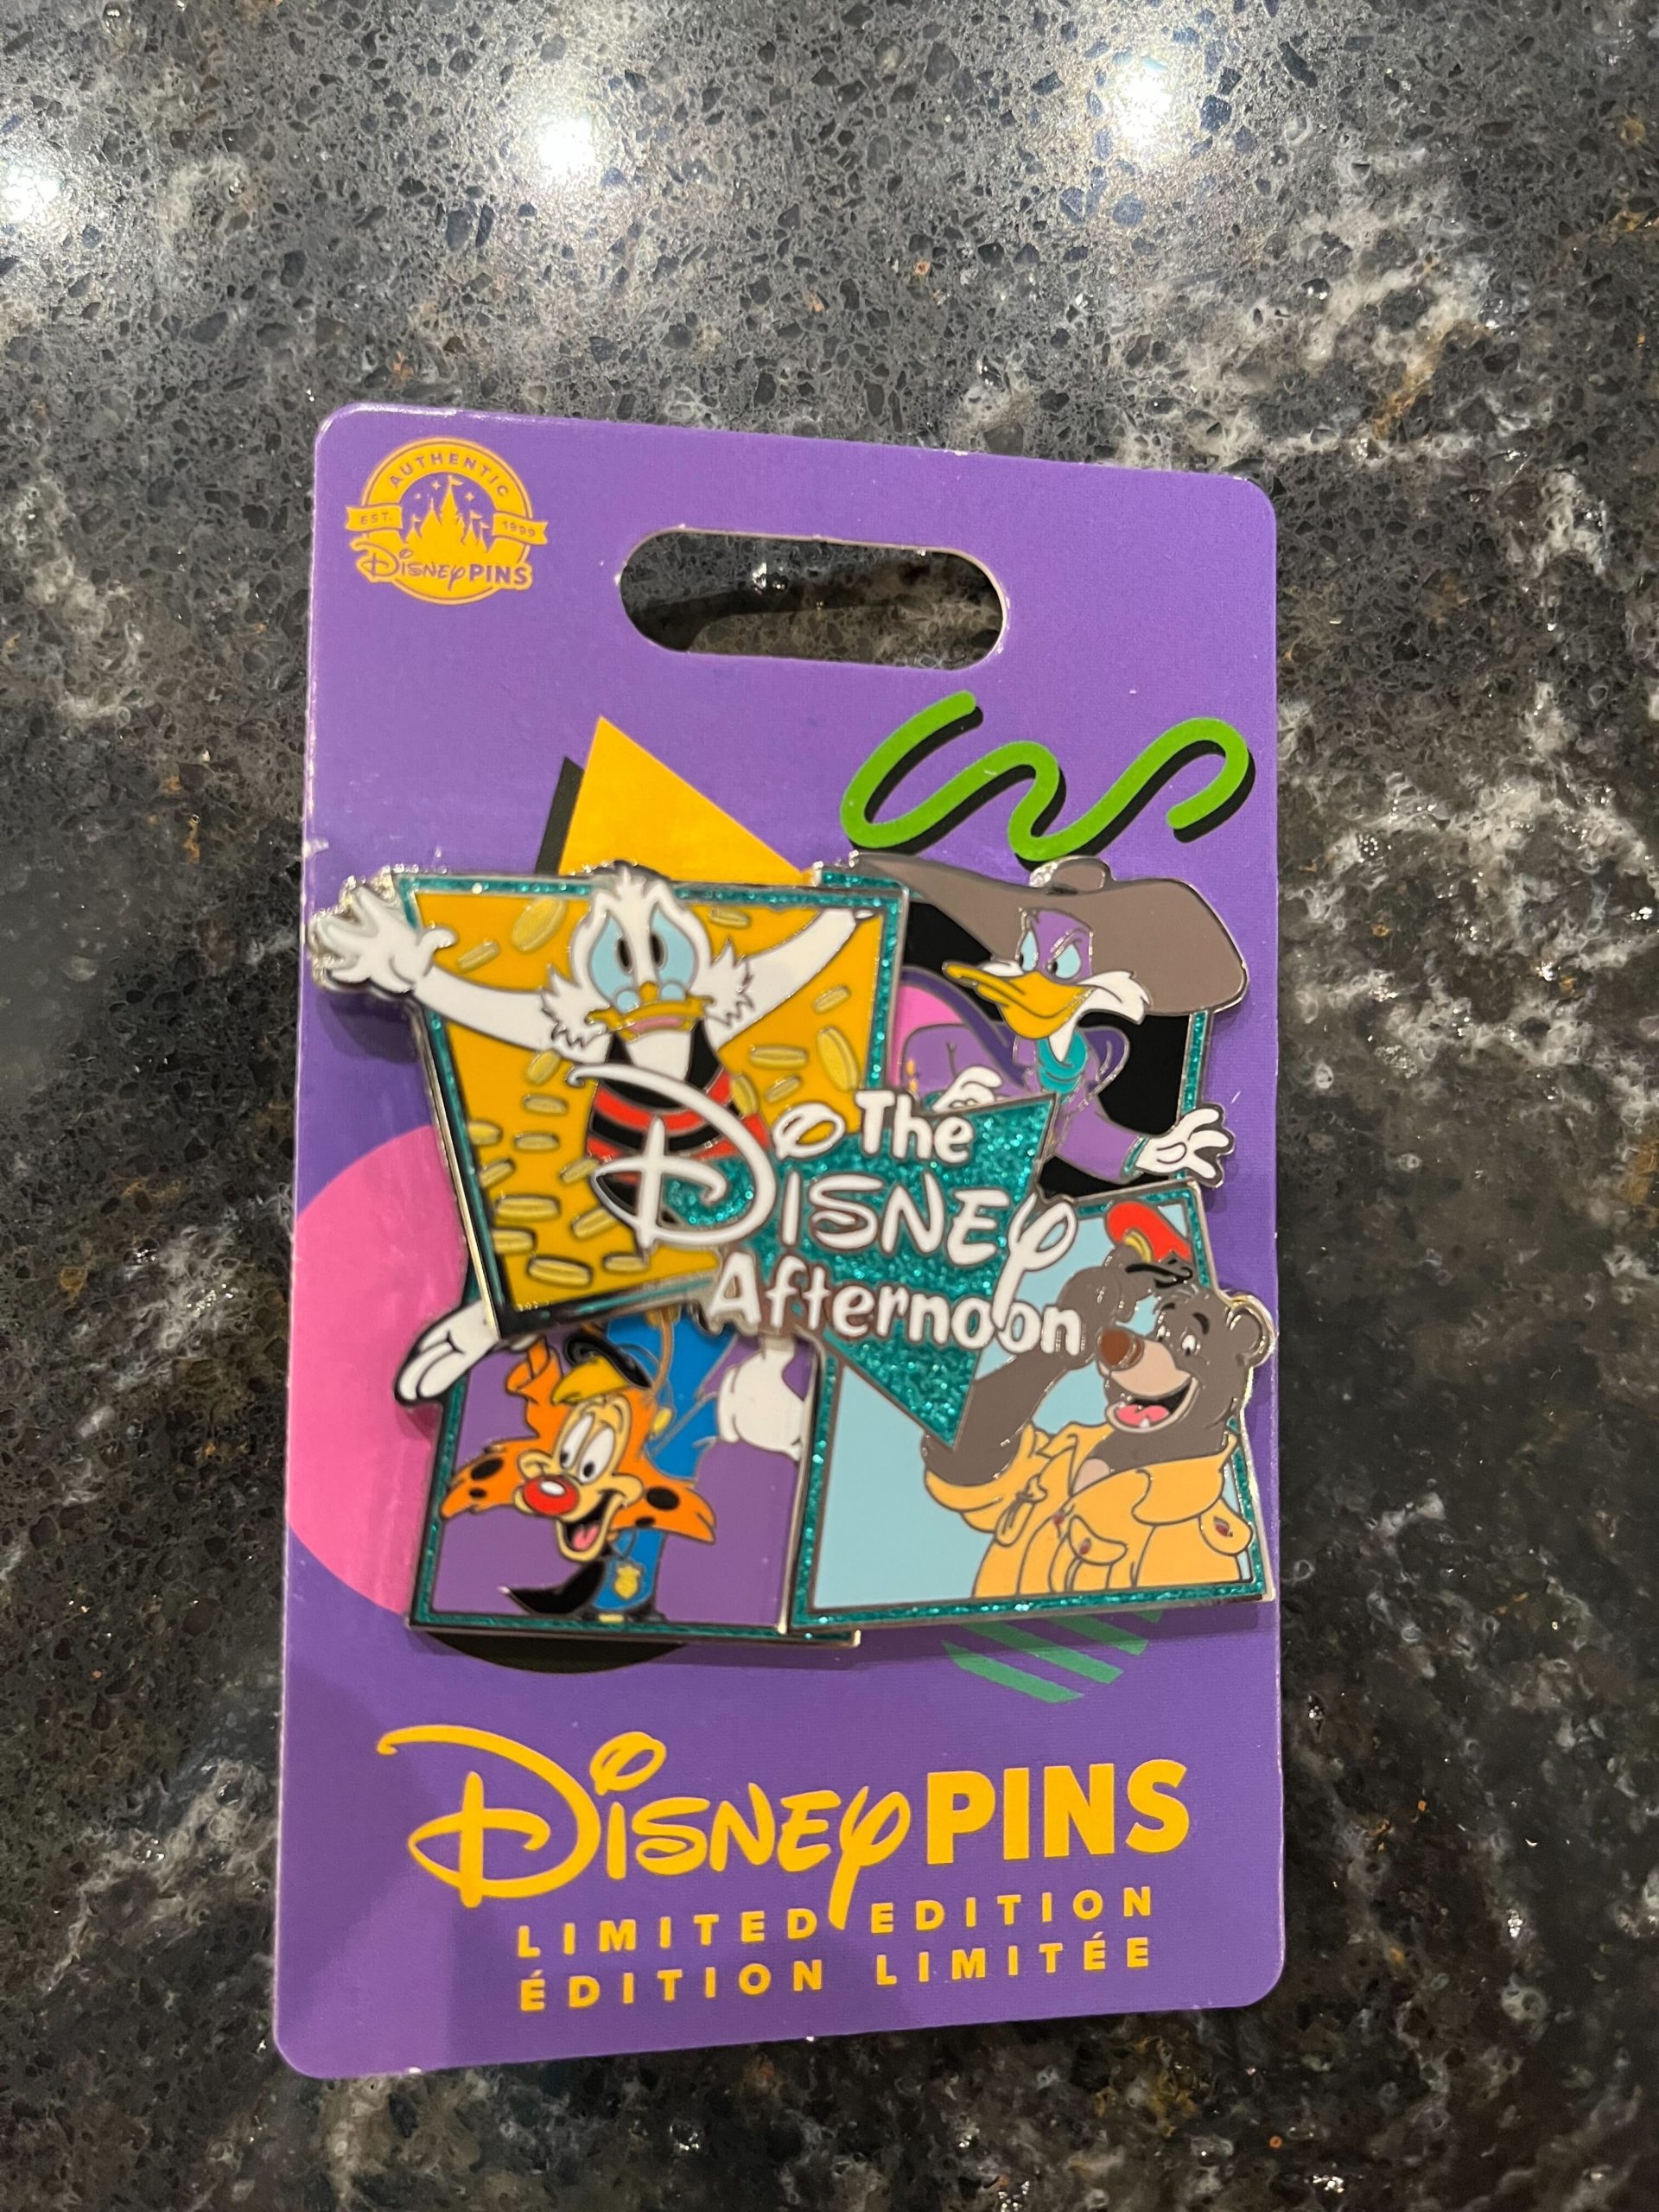 Check Out the New Disney Pins Spotted Today!